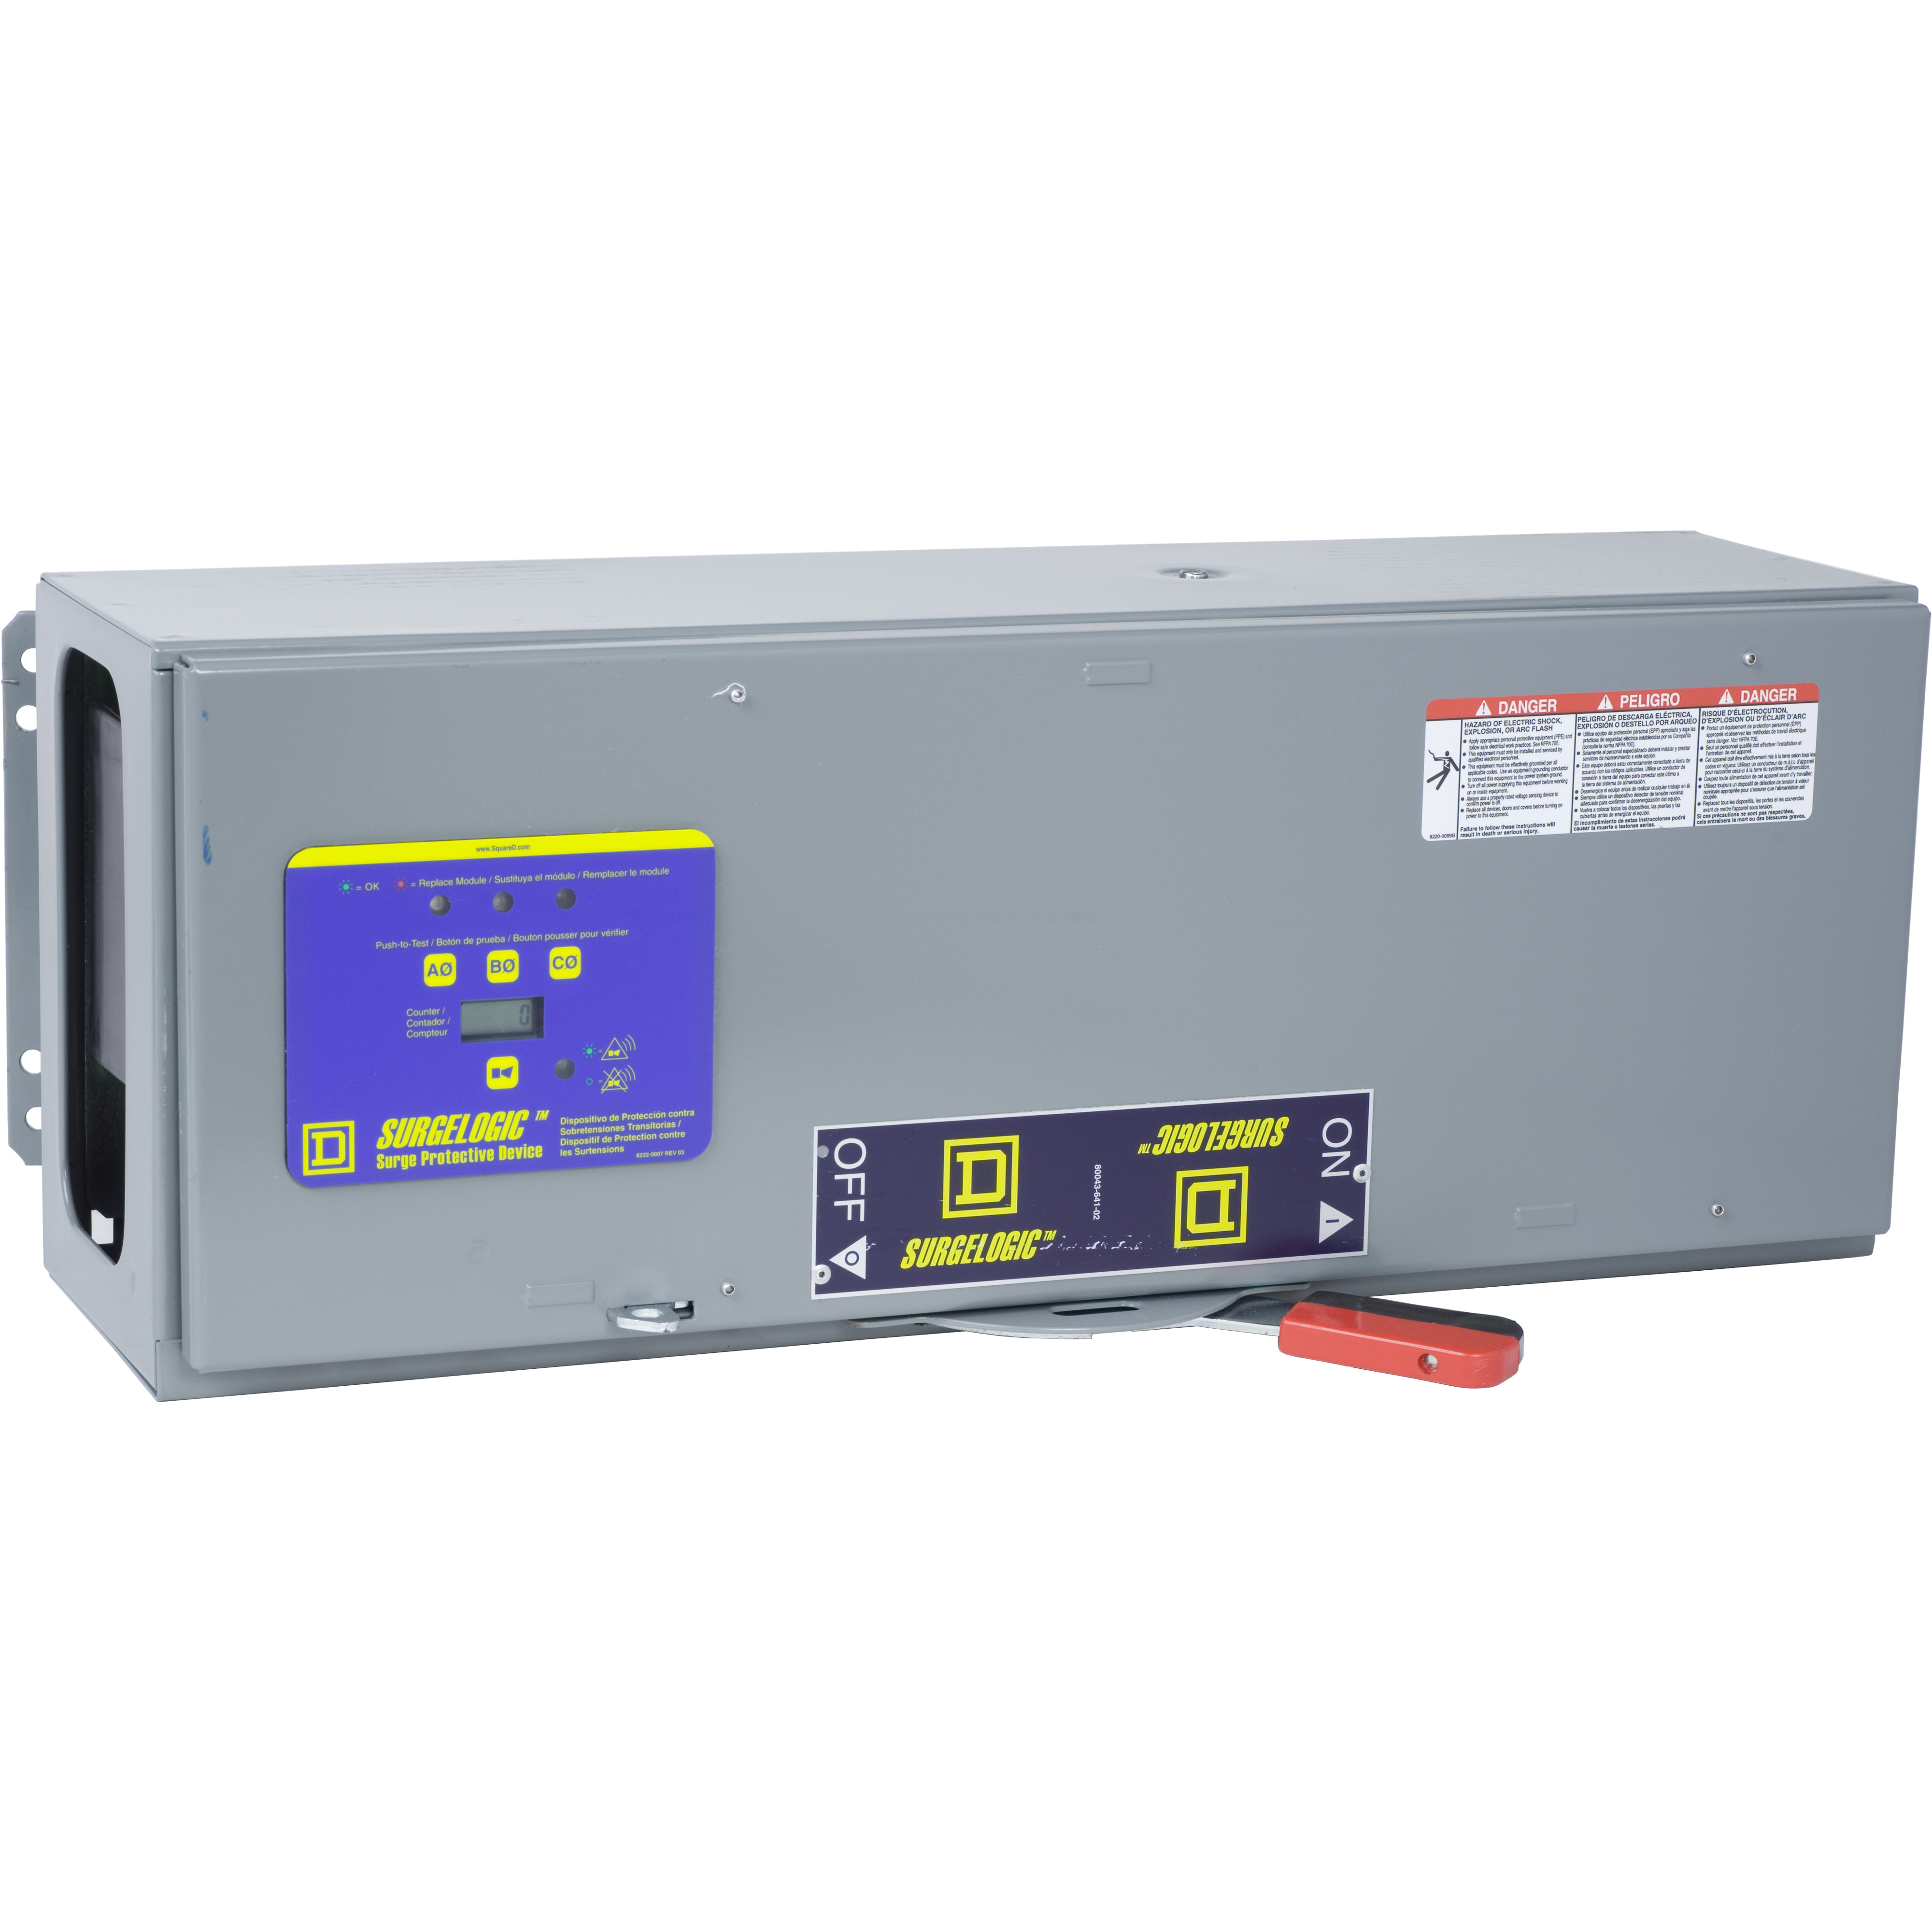 Surge protection device, Surgelogic, QMB, 240kA, 208Y/120 VAC, 3 phase, 4 wire, SPD type 2